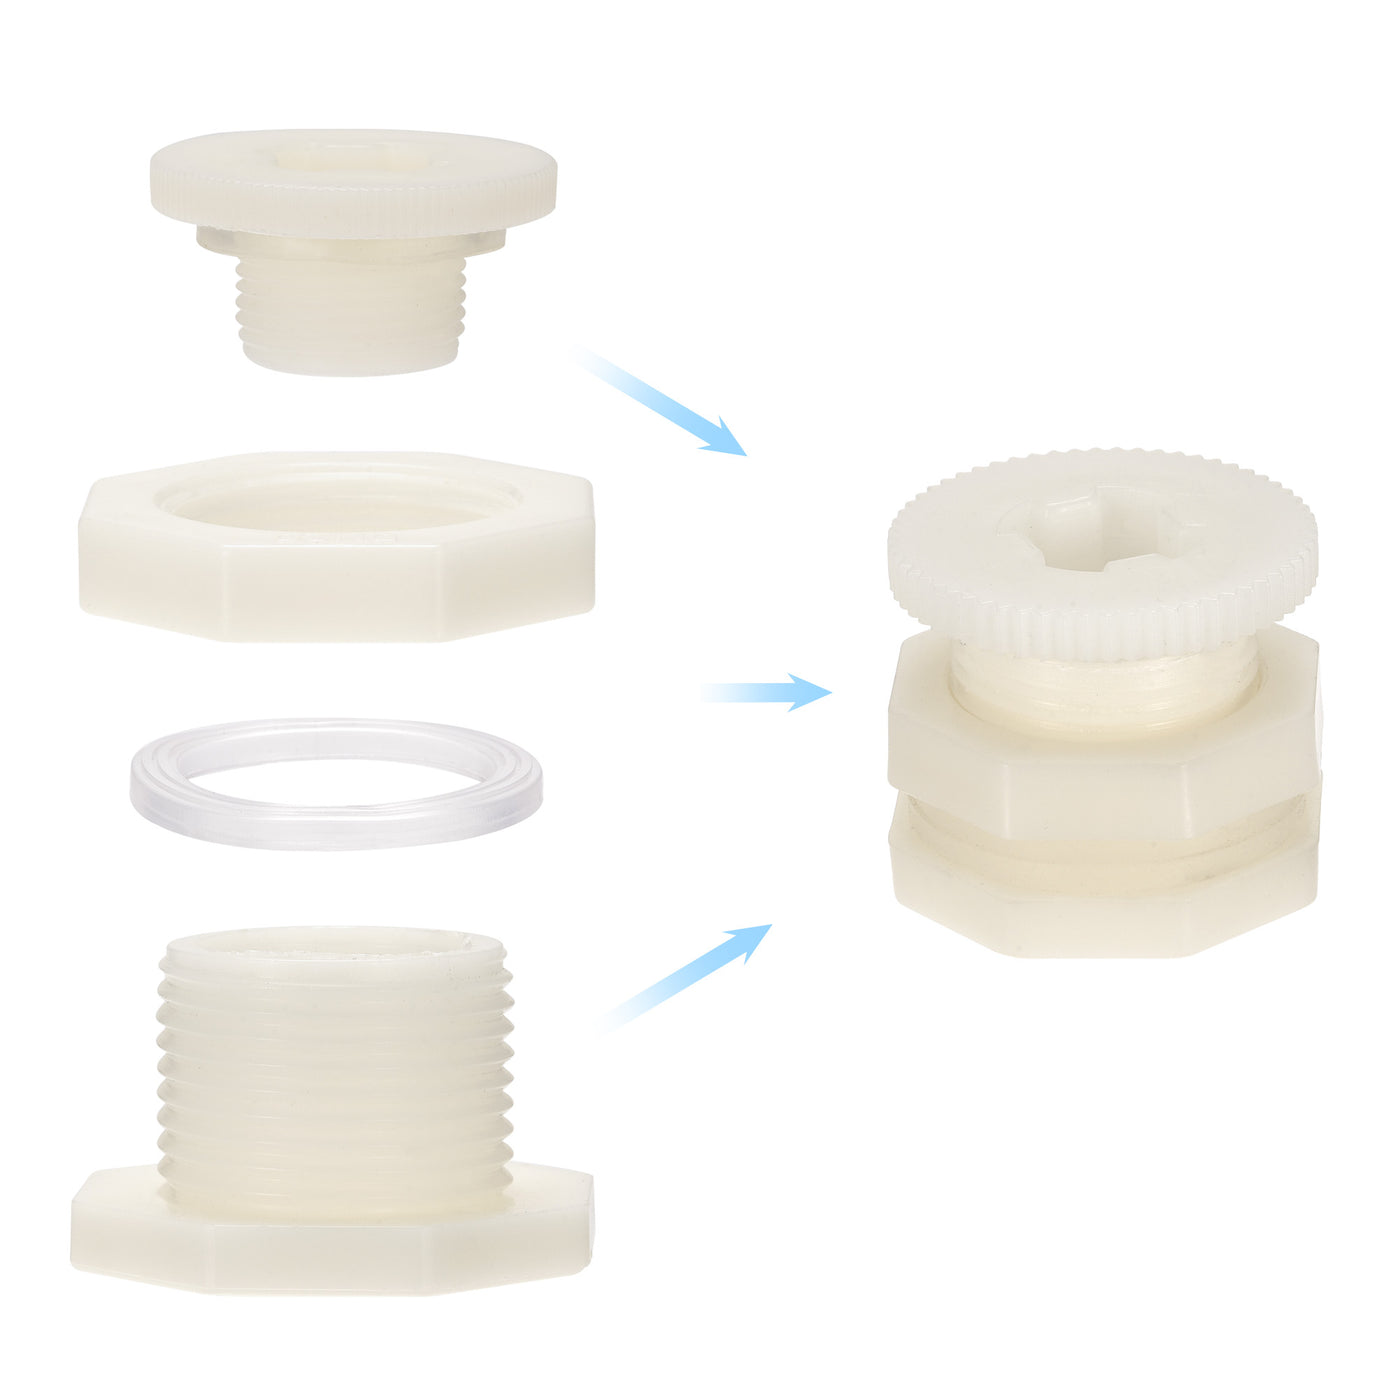 uxcell Uxcell ABS Bulkhead Tank Adapter with PVC Plug Fitting G1/2 Thread for Rain Buckets Water Tanks Aquariums 1 Set